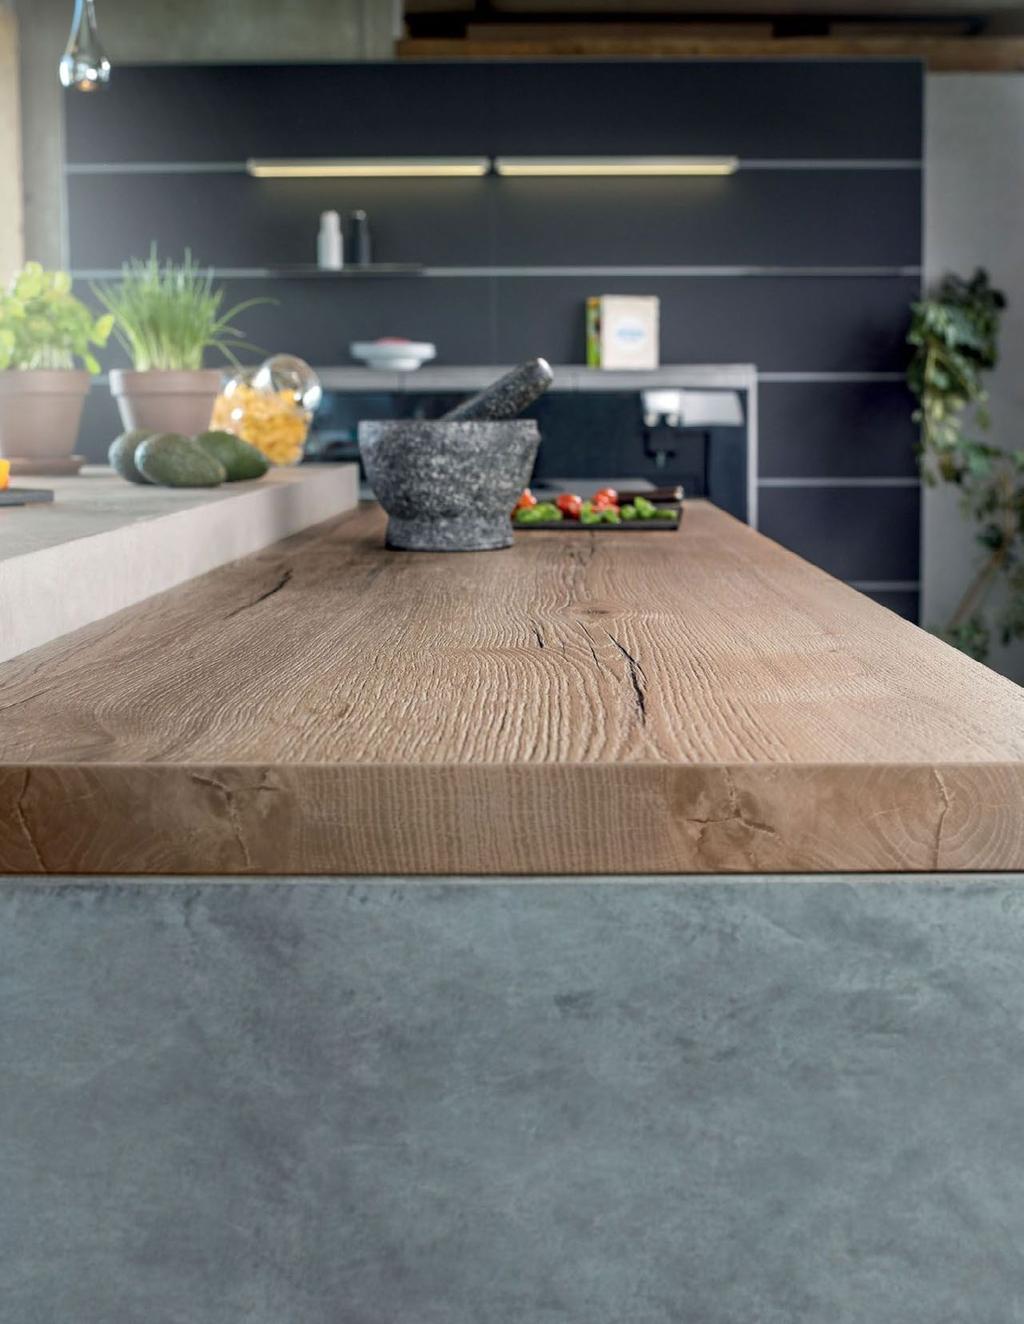 6 WORKTOPS ABOVE THE REST Ww A uniquely crafted worktop is within your reach with the stylish selection of Schenk worktops. Our worktops are constructed with durability in mind.